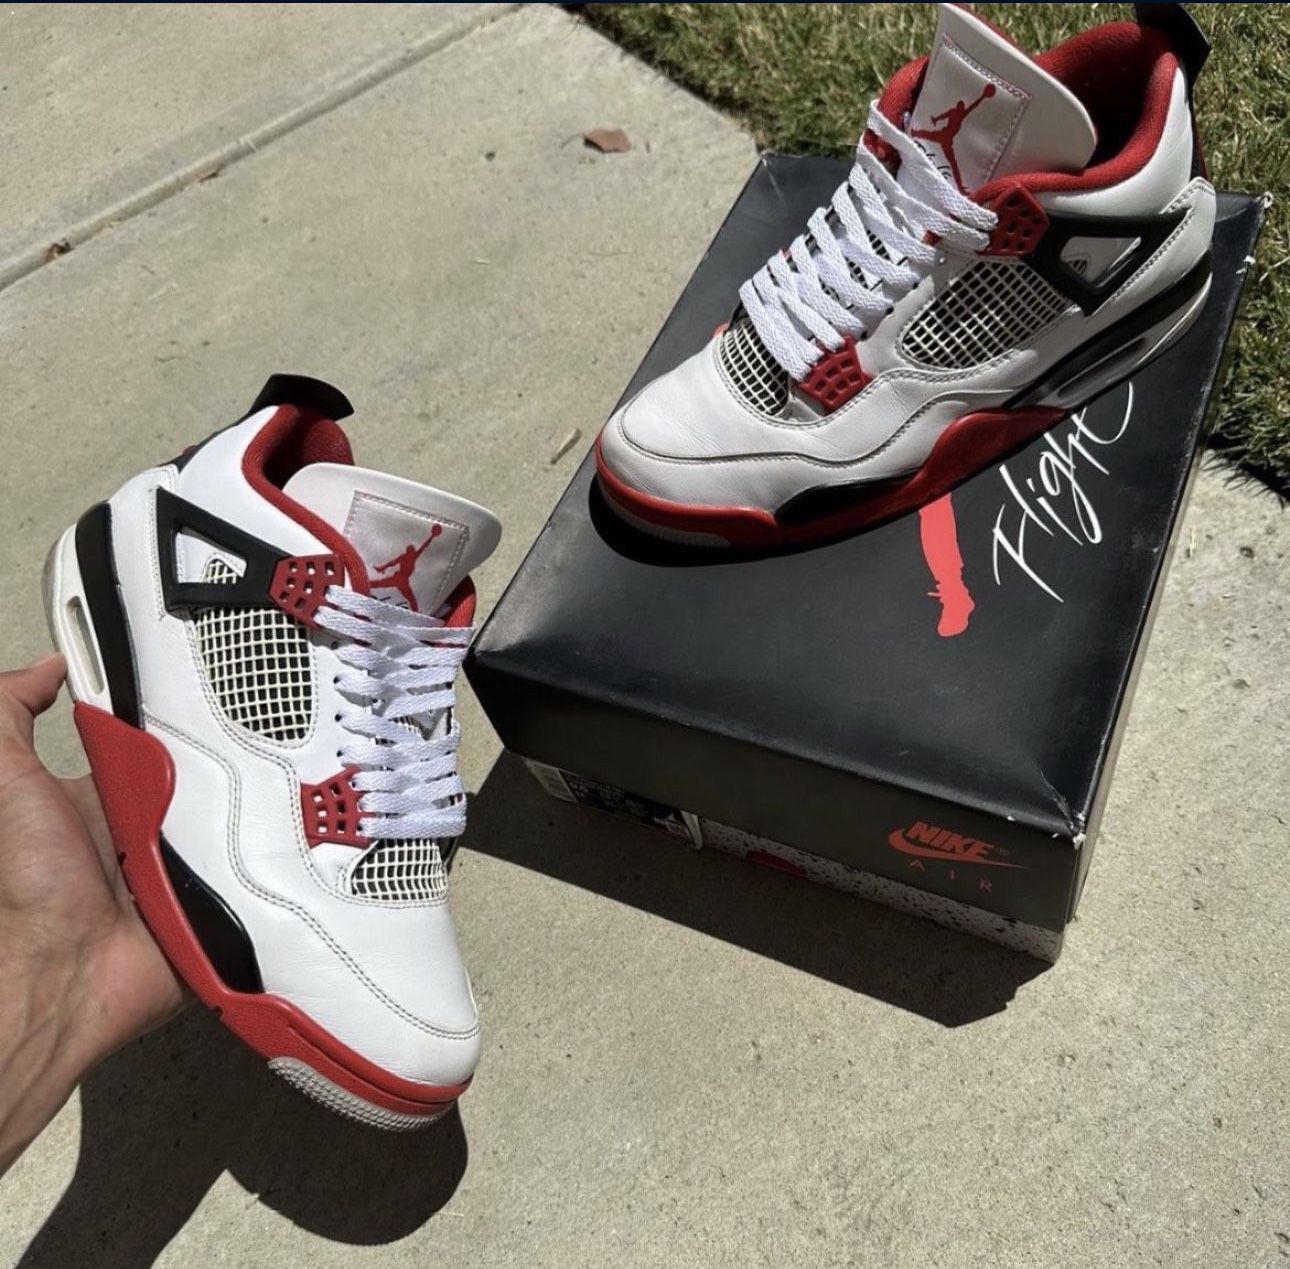 Fire red 4s (2020 release)